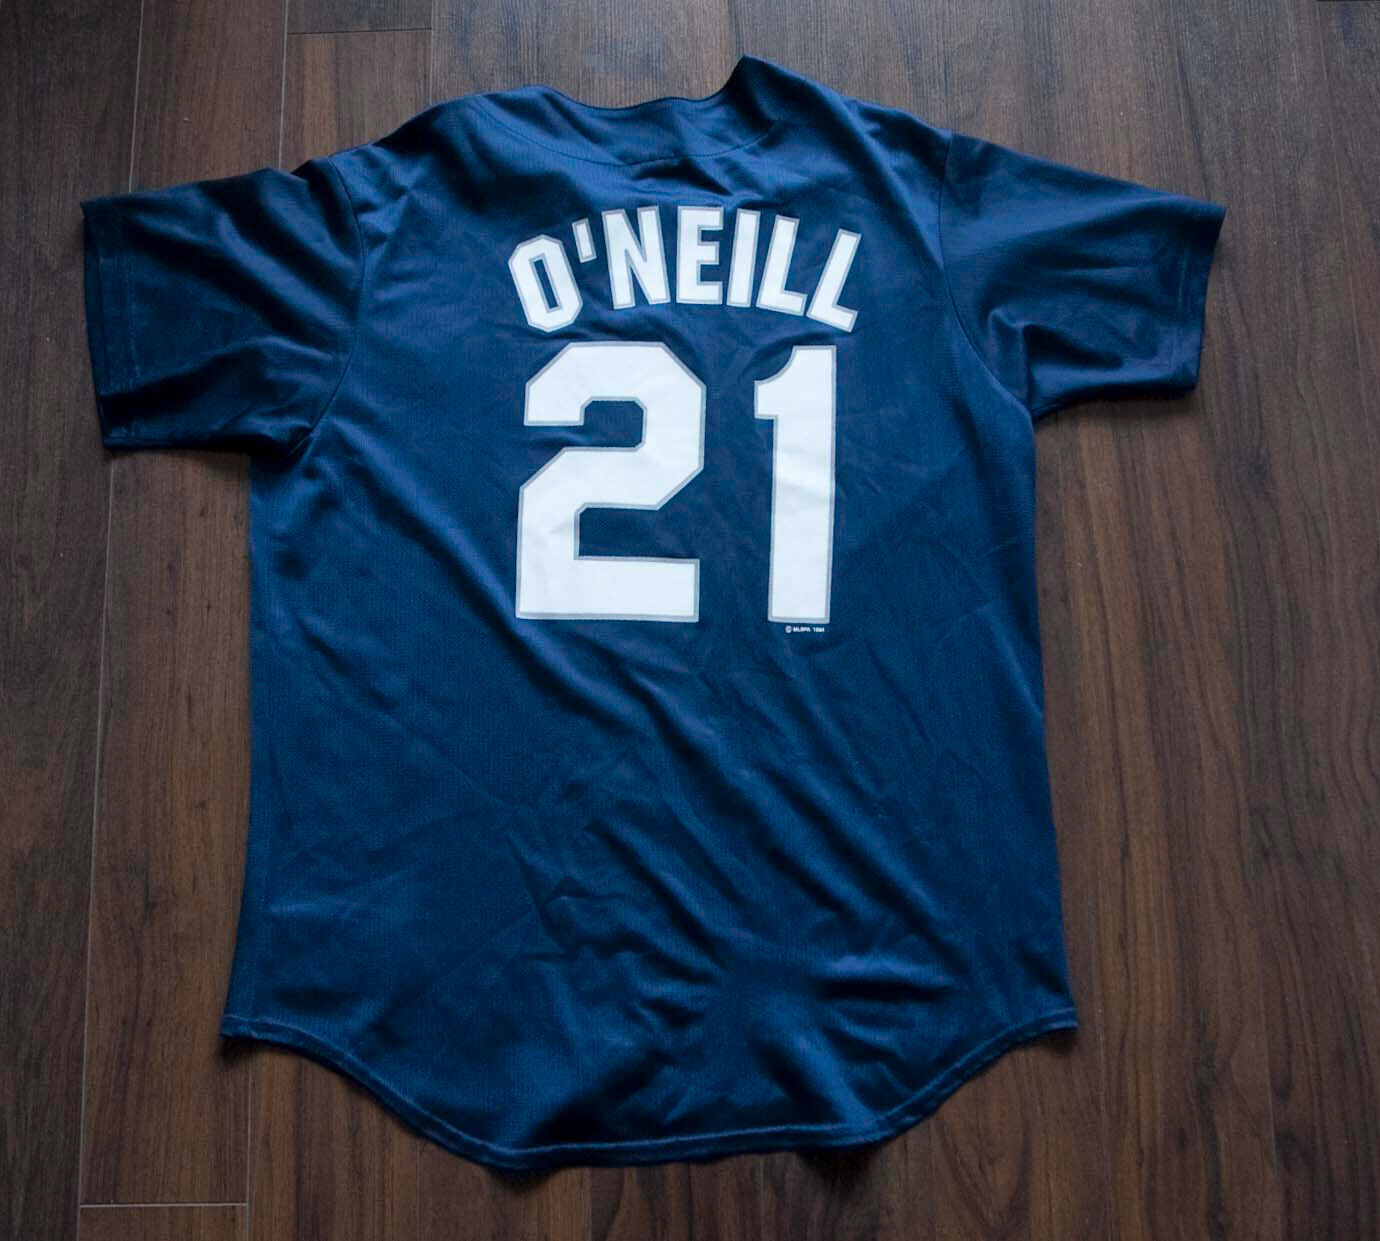 Paul O'neill Jersey Yankees New York Majectic 1994 Vtg Made USA Size L *cg0524a8